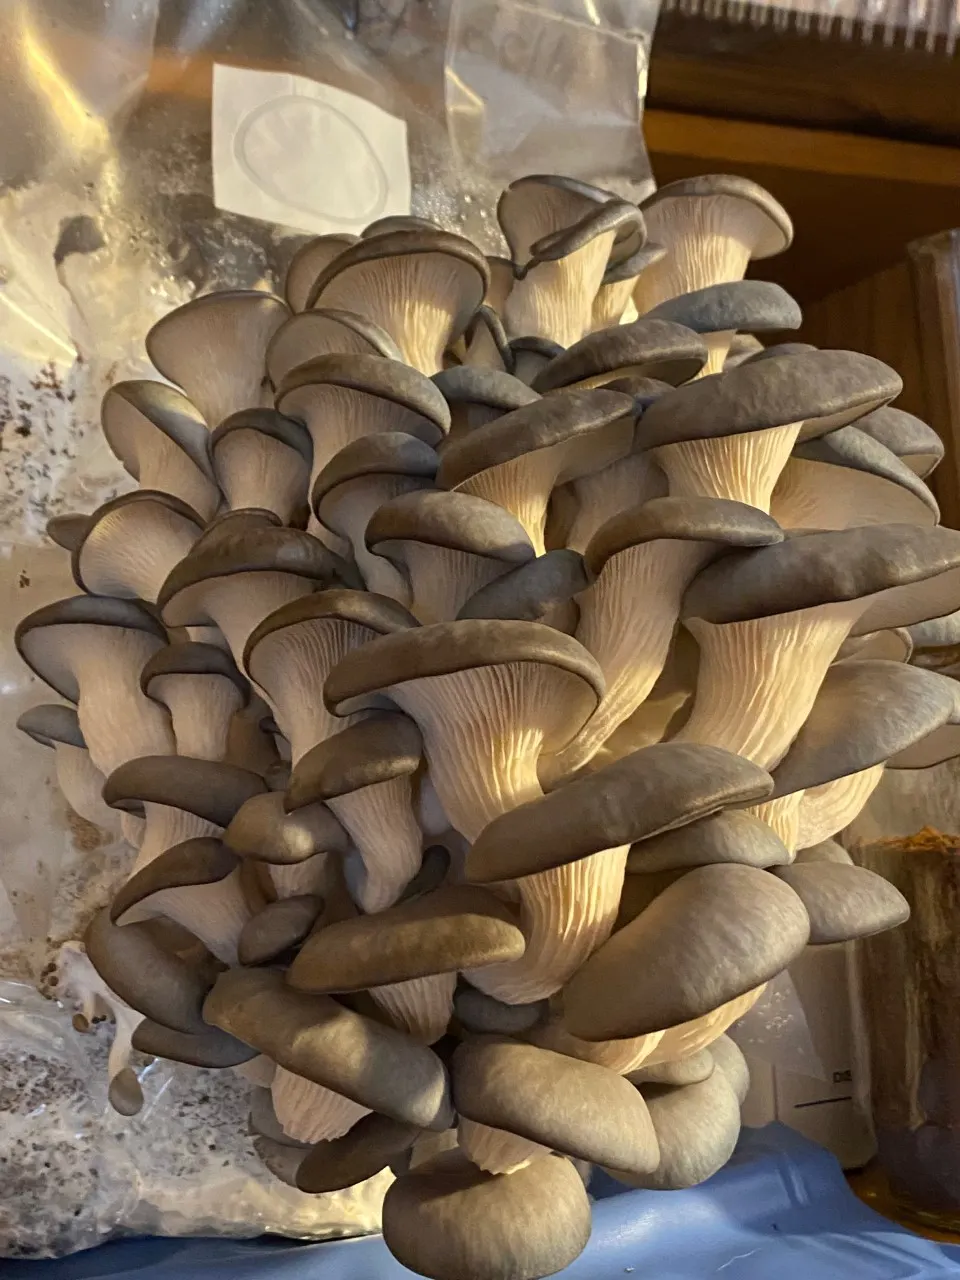 How to Grow Oyster Mushrooms at Home